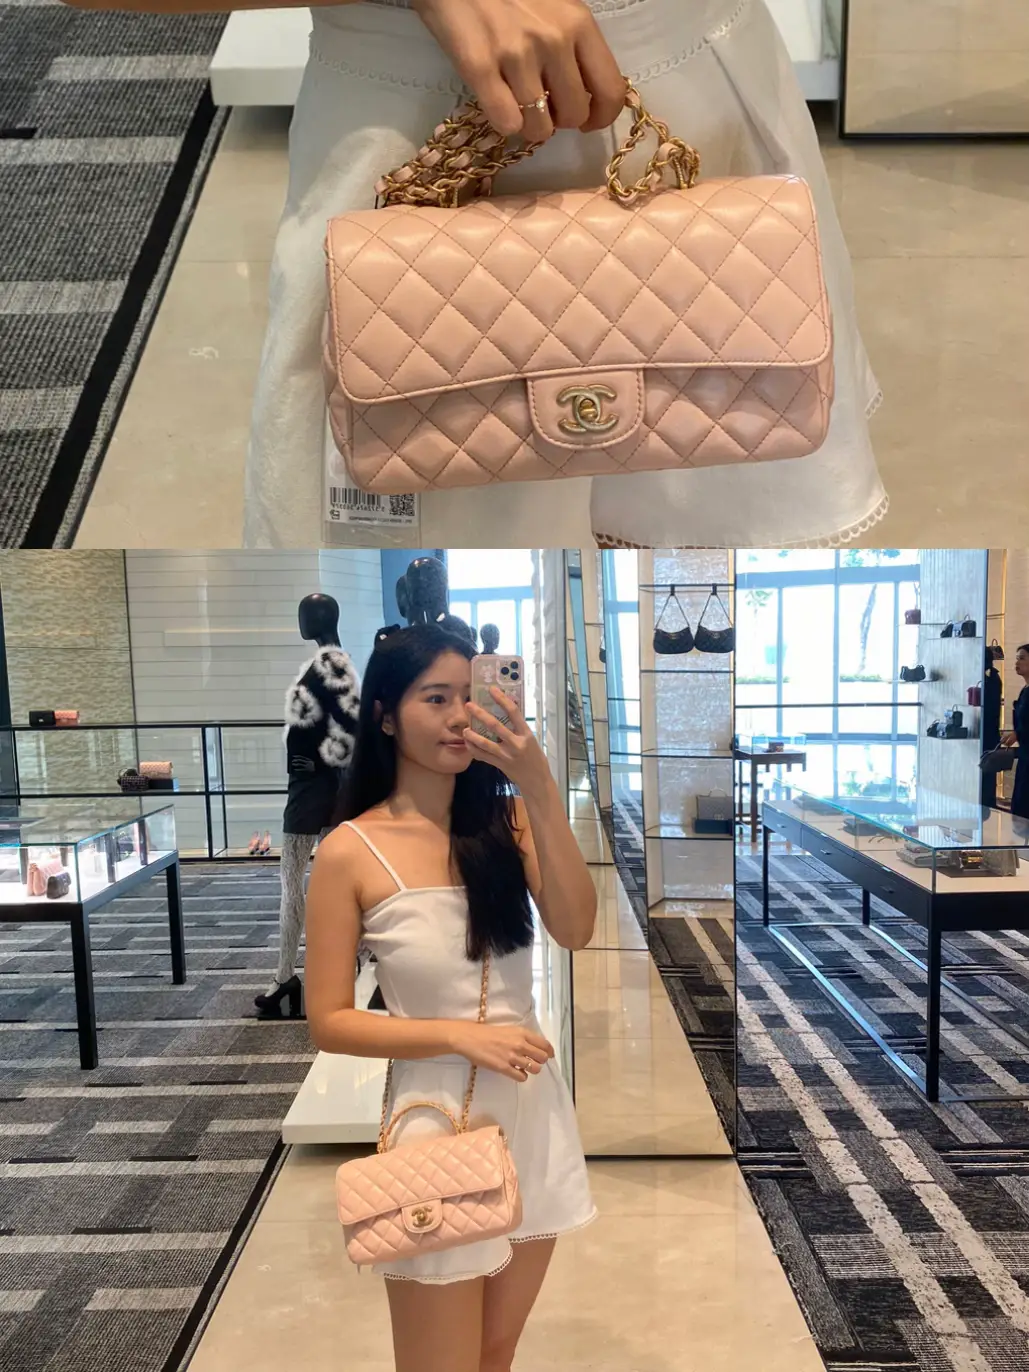 Chanel Heart Bag 2022 - Price, Launch Date & More - Luxe Front